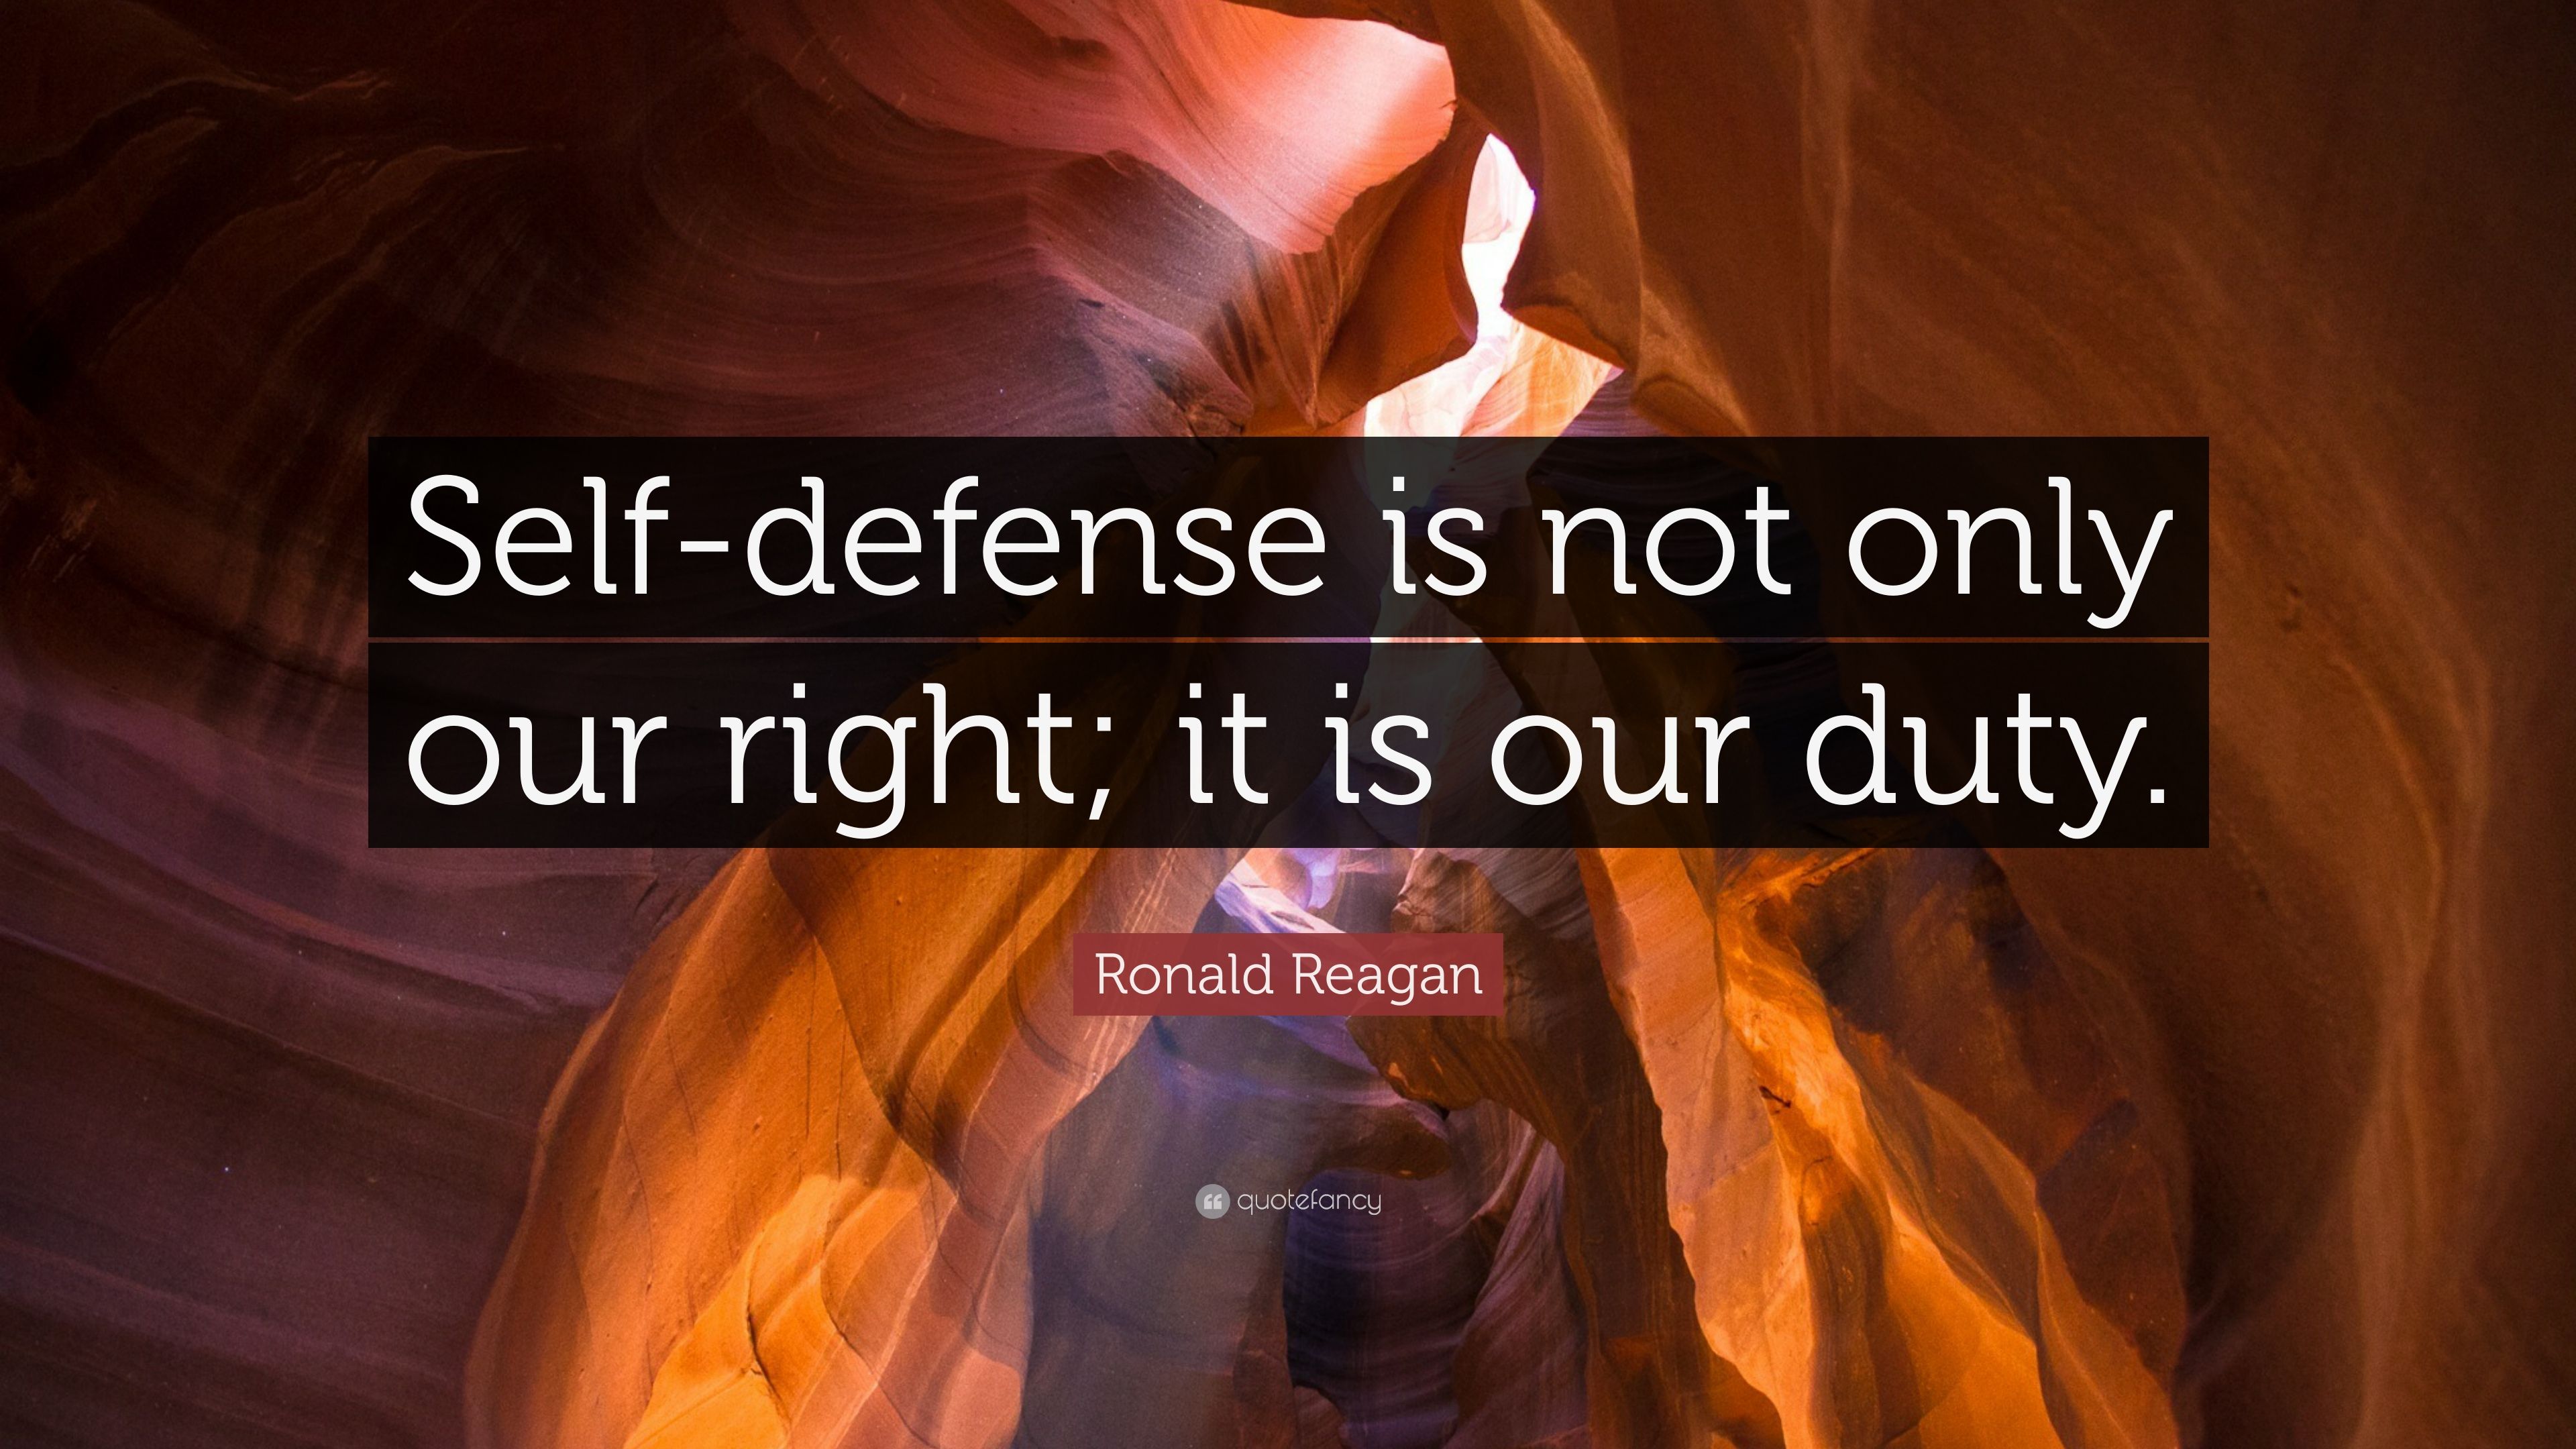 Ronald Reagan Quote: “Self Defense Is Not Only Our Right; It Is Our Duty.” (12 Wallpaper)